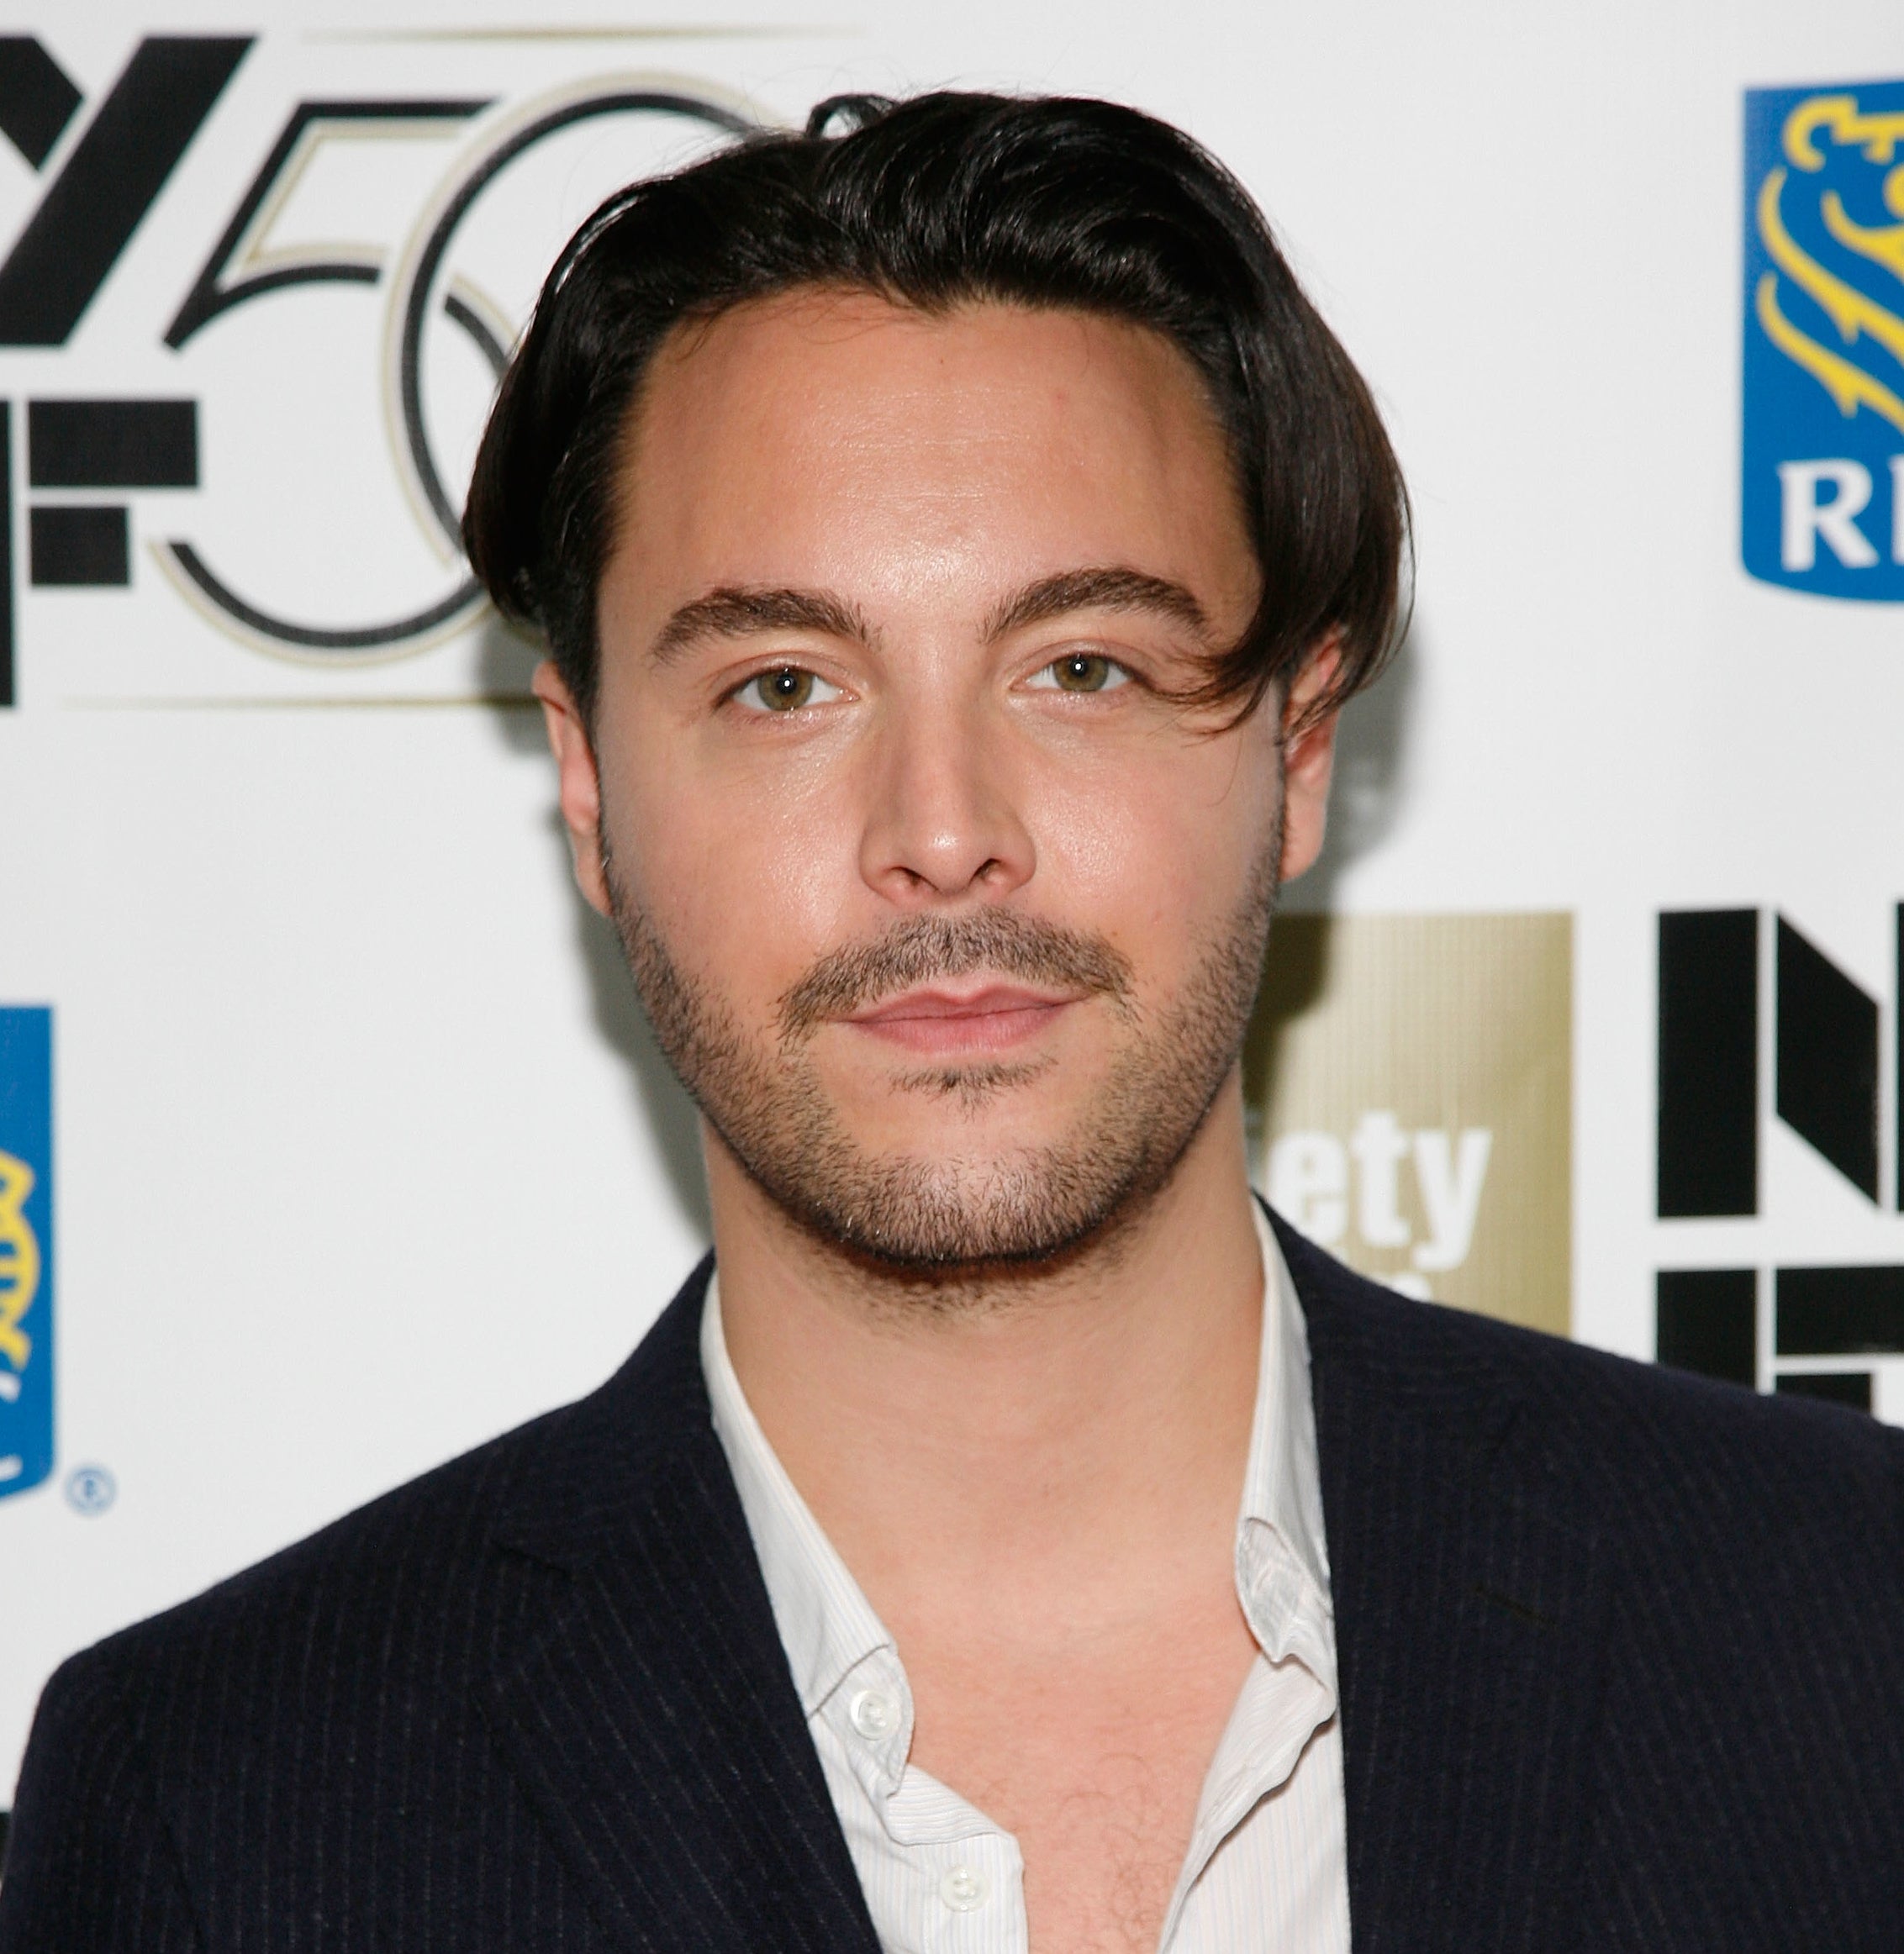 Jack Huston in dark blazer over shirt at an event with sponsor logos in background